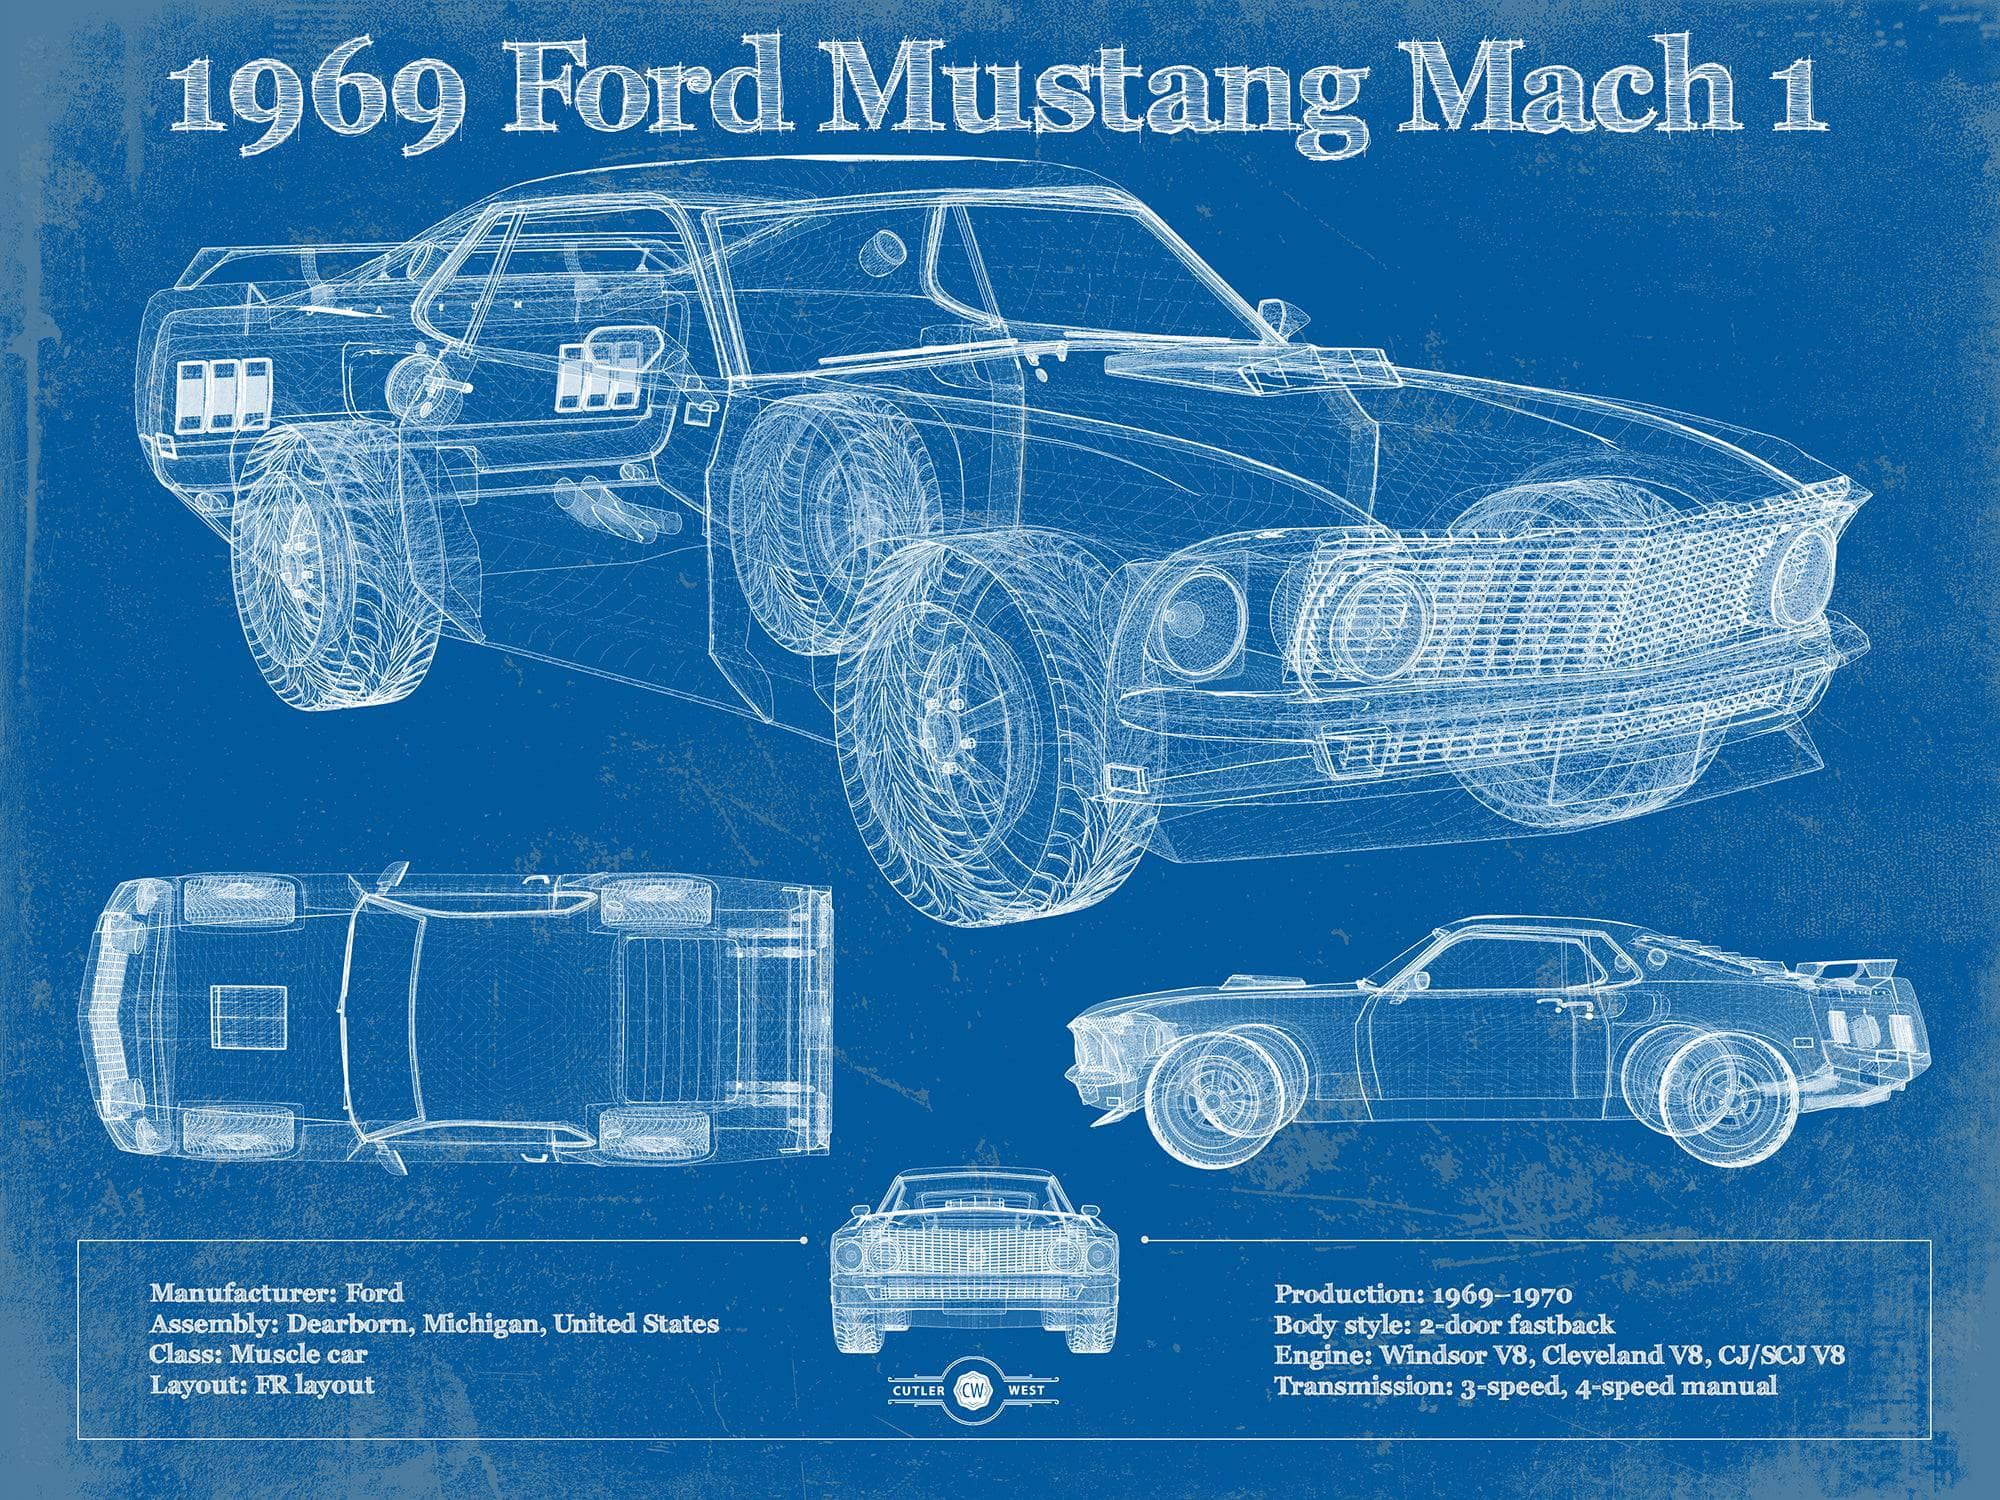 Cutler West Ford Collection 14" x 11" / Unframed 1969 Ford Mustang Mach 1 Vintage Blueprint Auto Print 833110166_42071